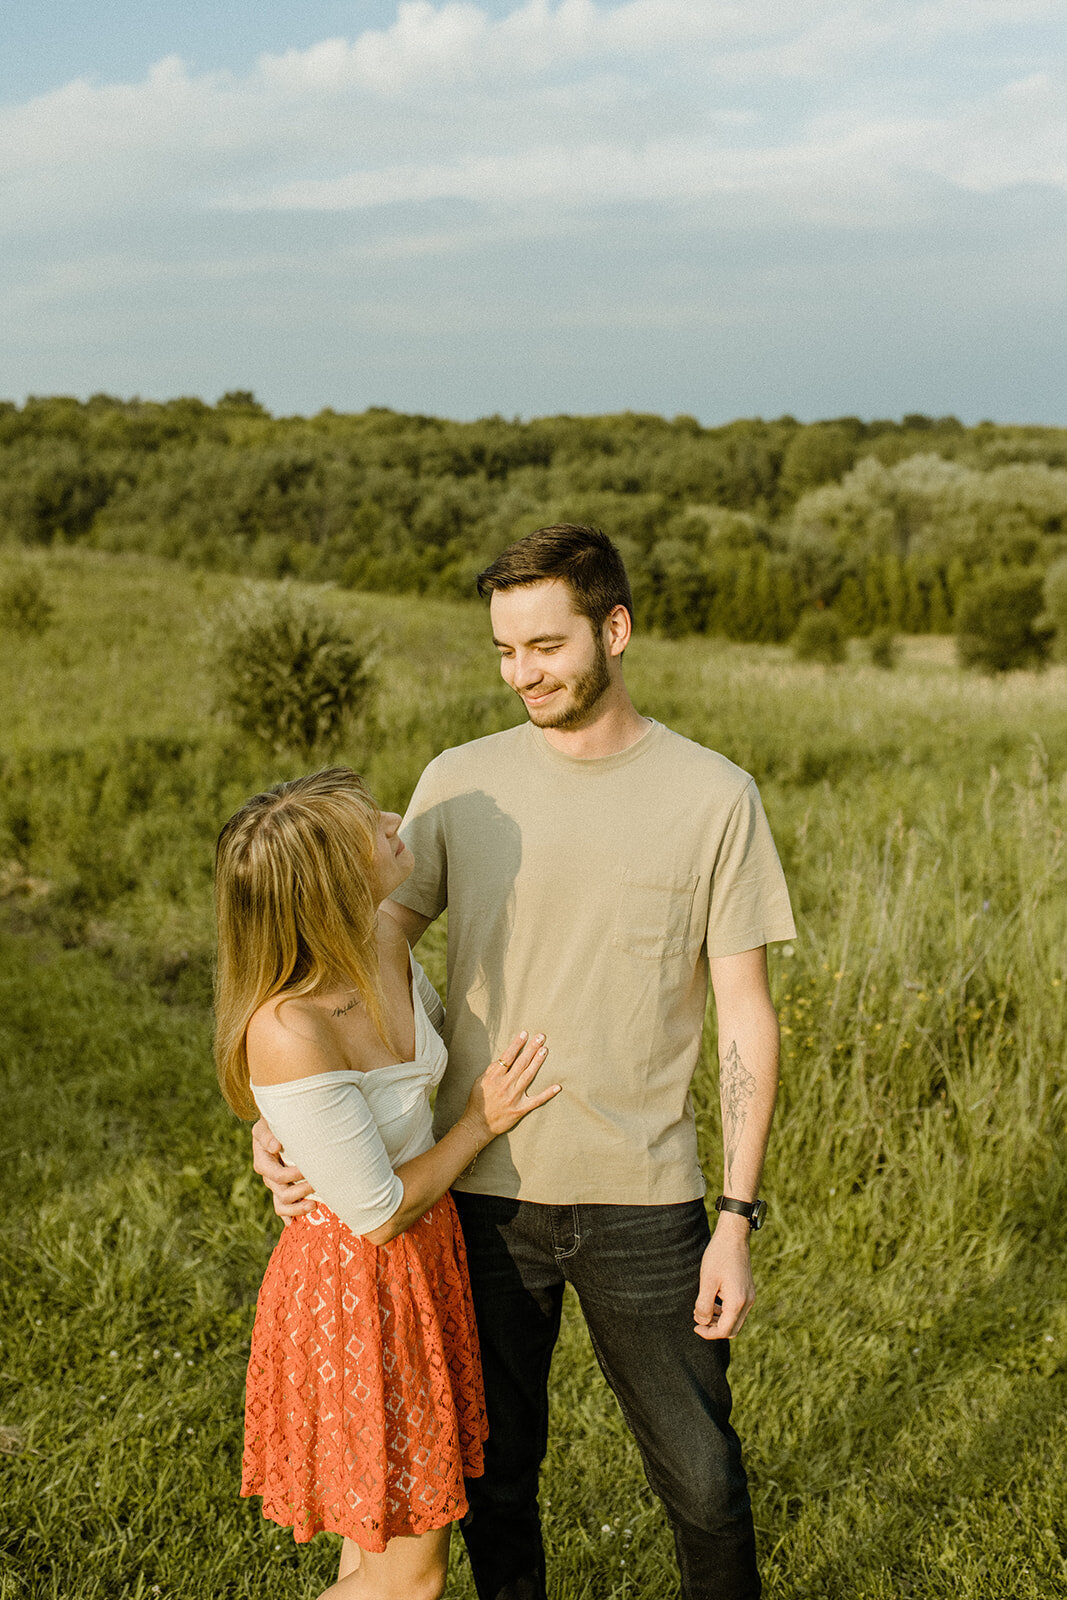 country-cut-flowers-summer-engagement-session-fun-romantic-indie-movie-wanderlust-295